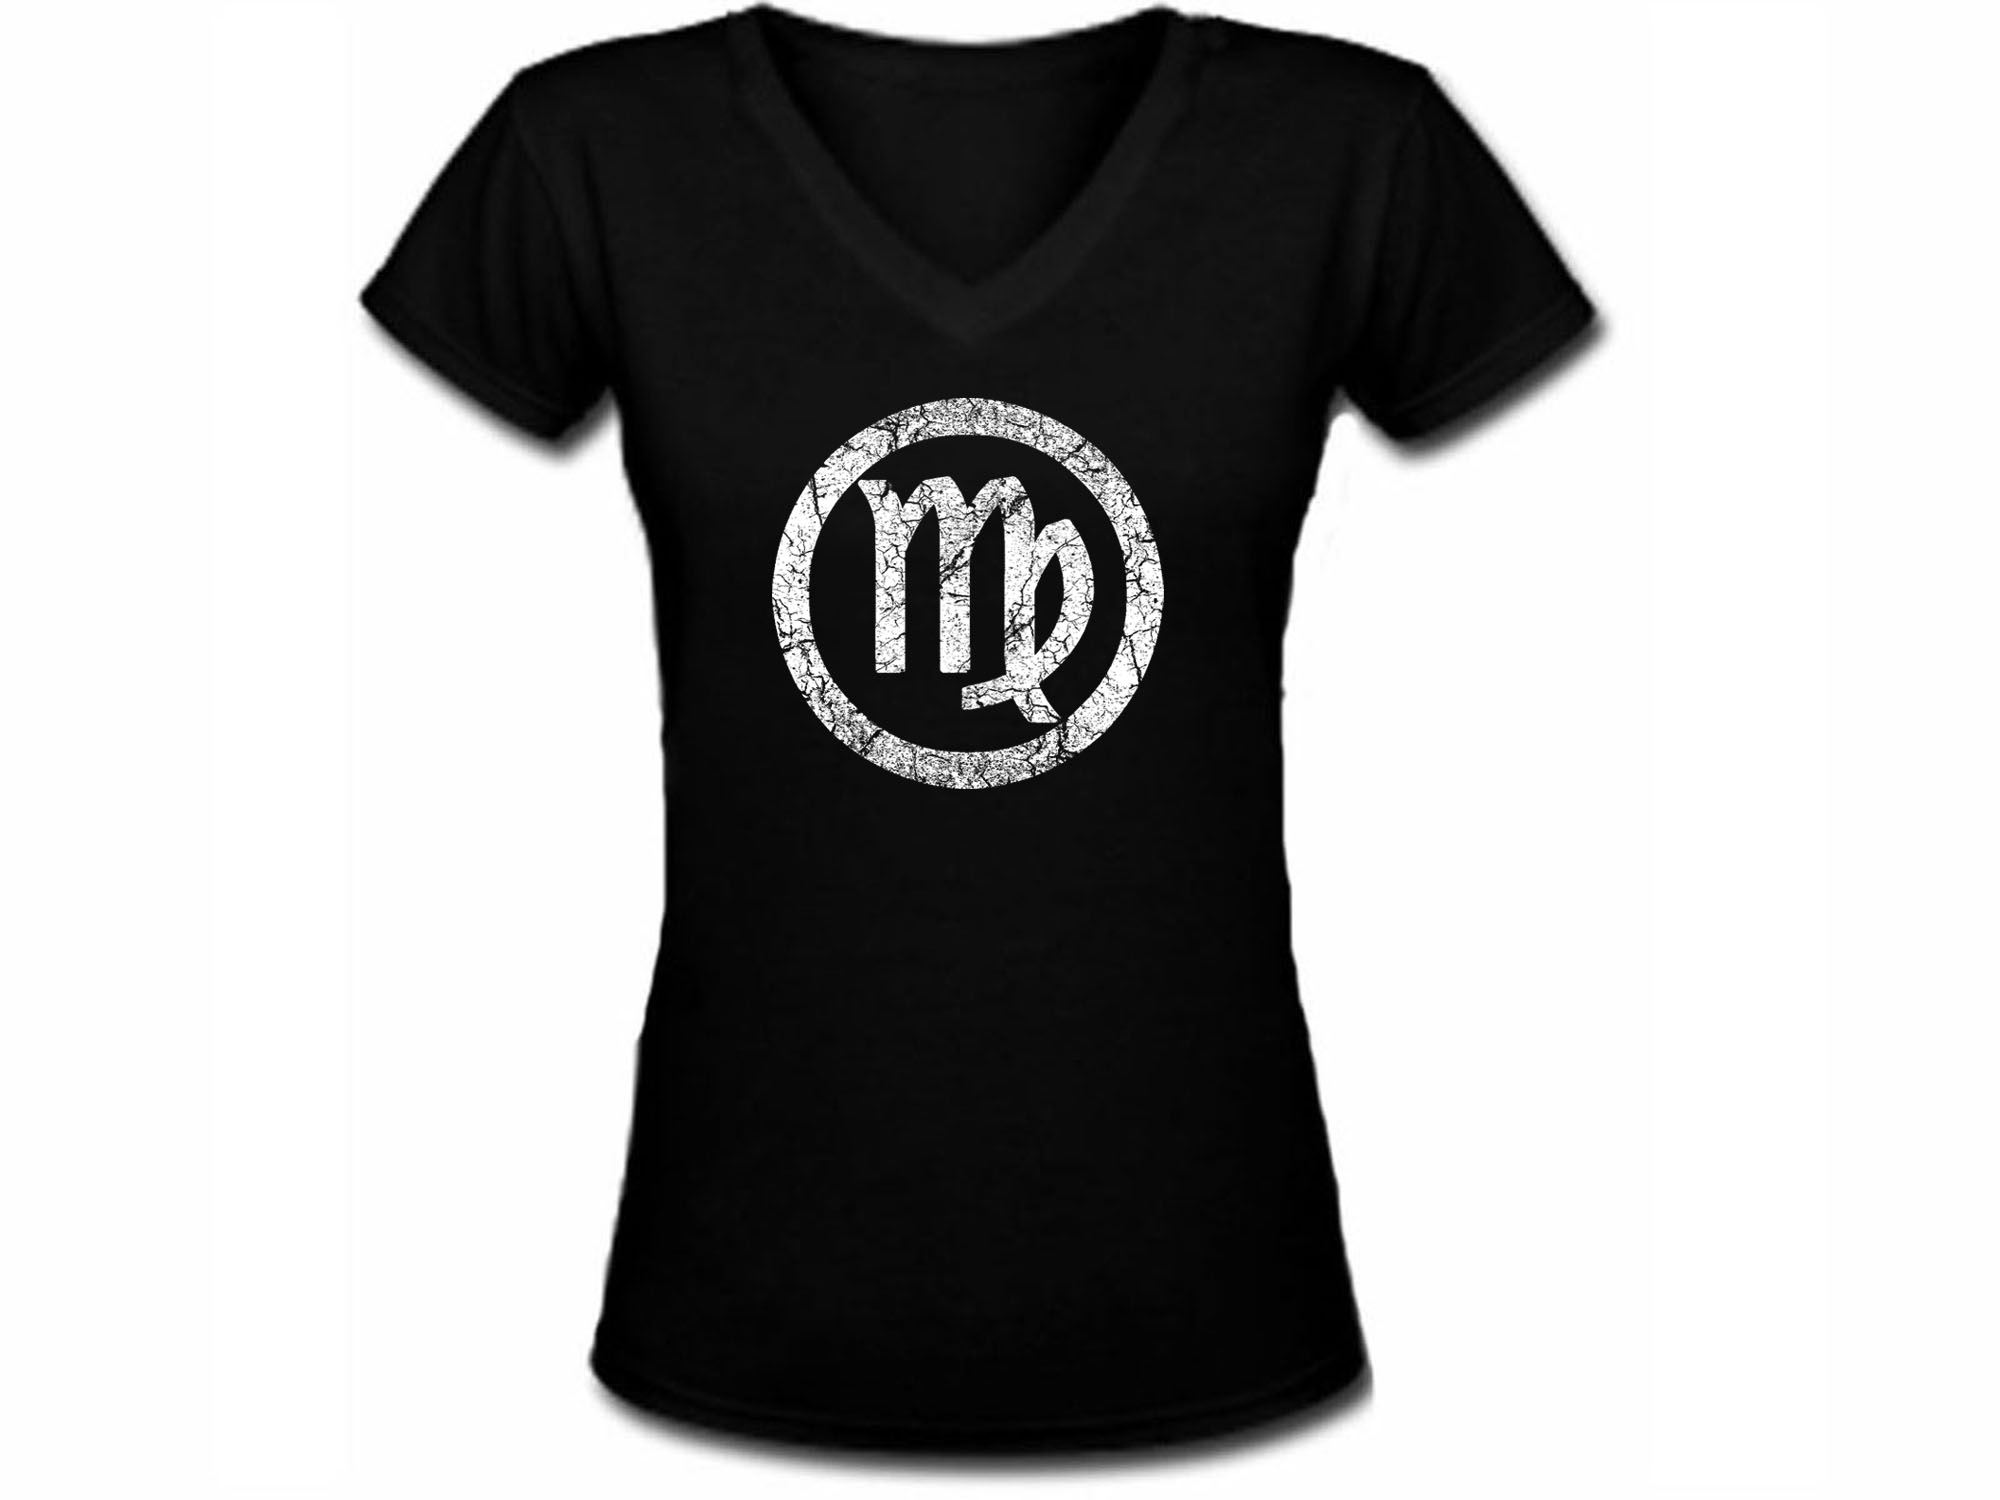 Virgo horoscope zodiac sign distressed look t-shirt for women or teenagers